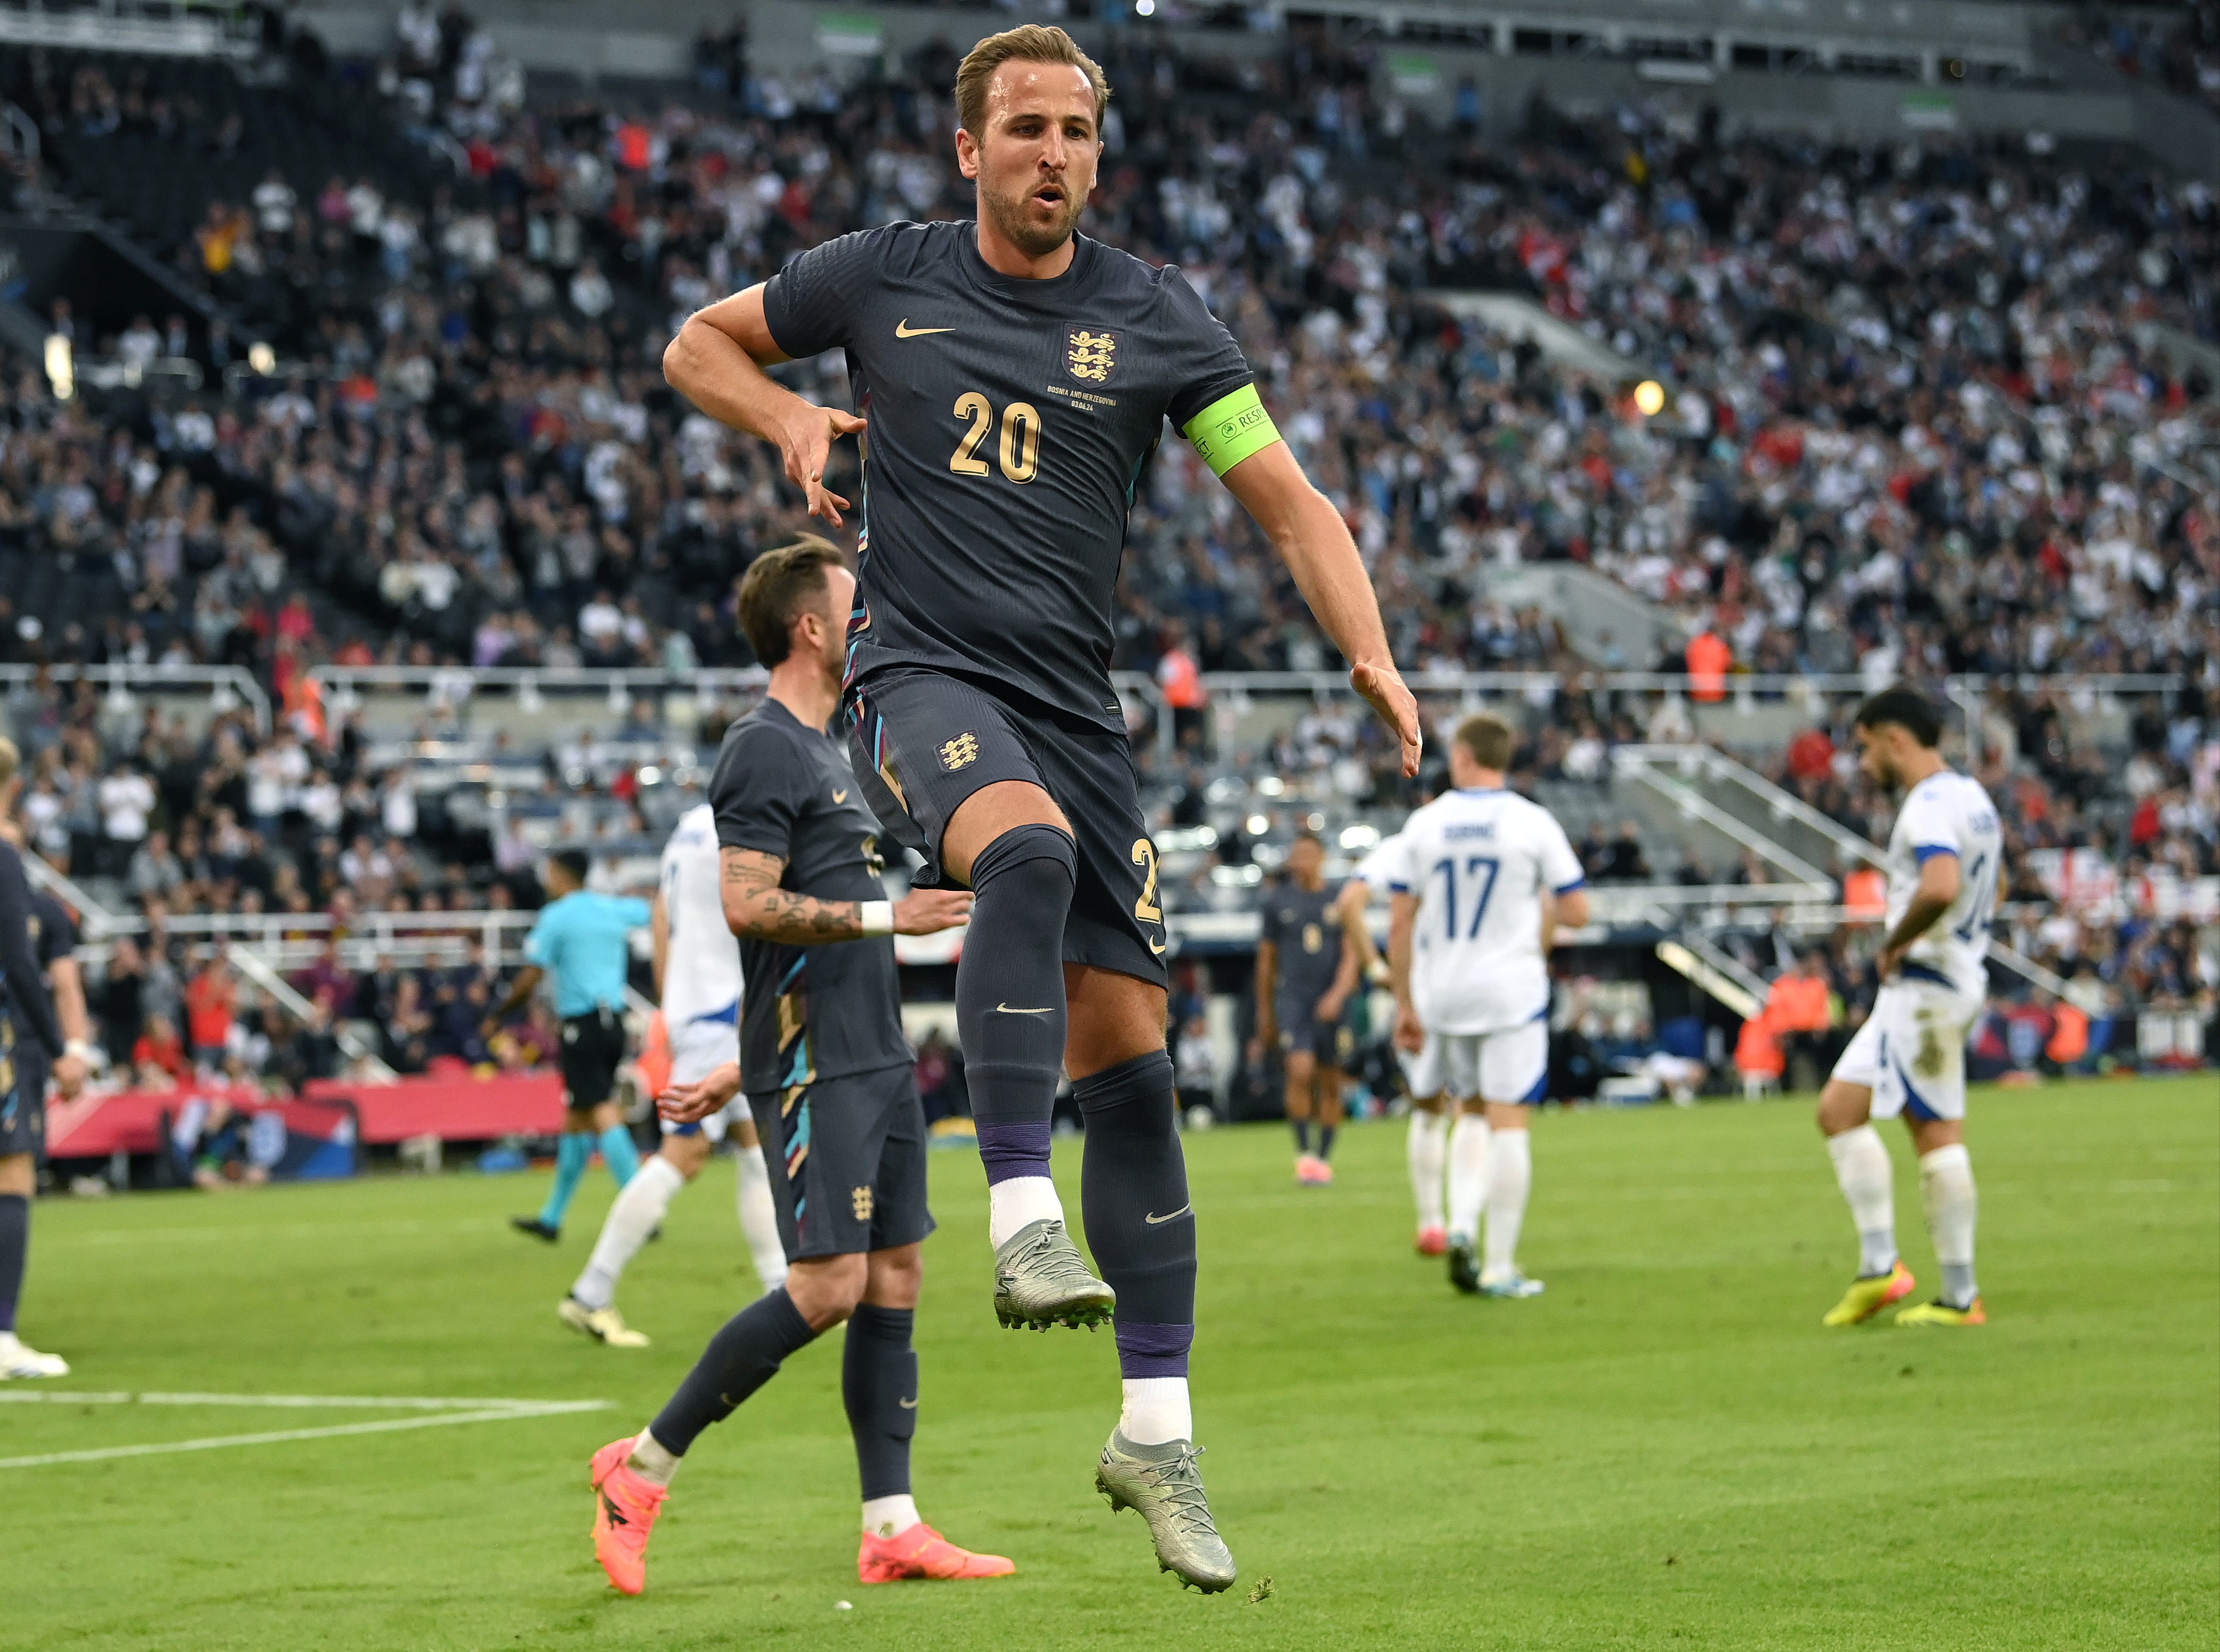 Harry Kane will be out to extend his record as England’s top goalscorer ever